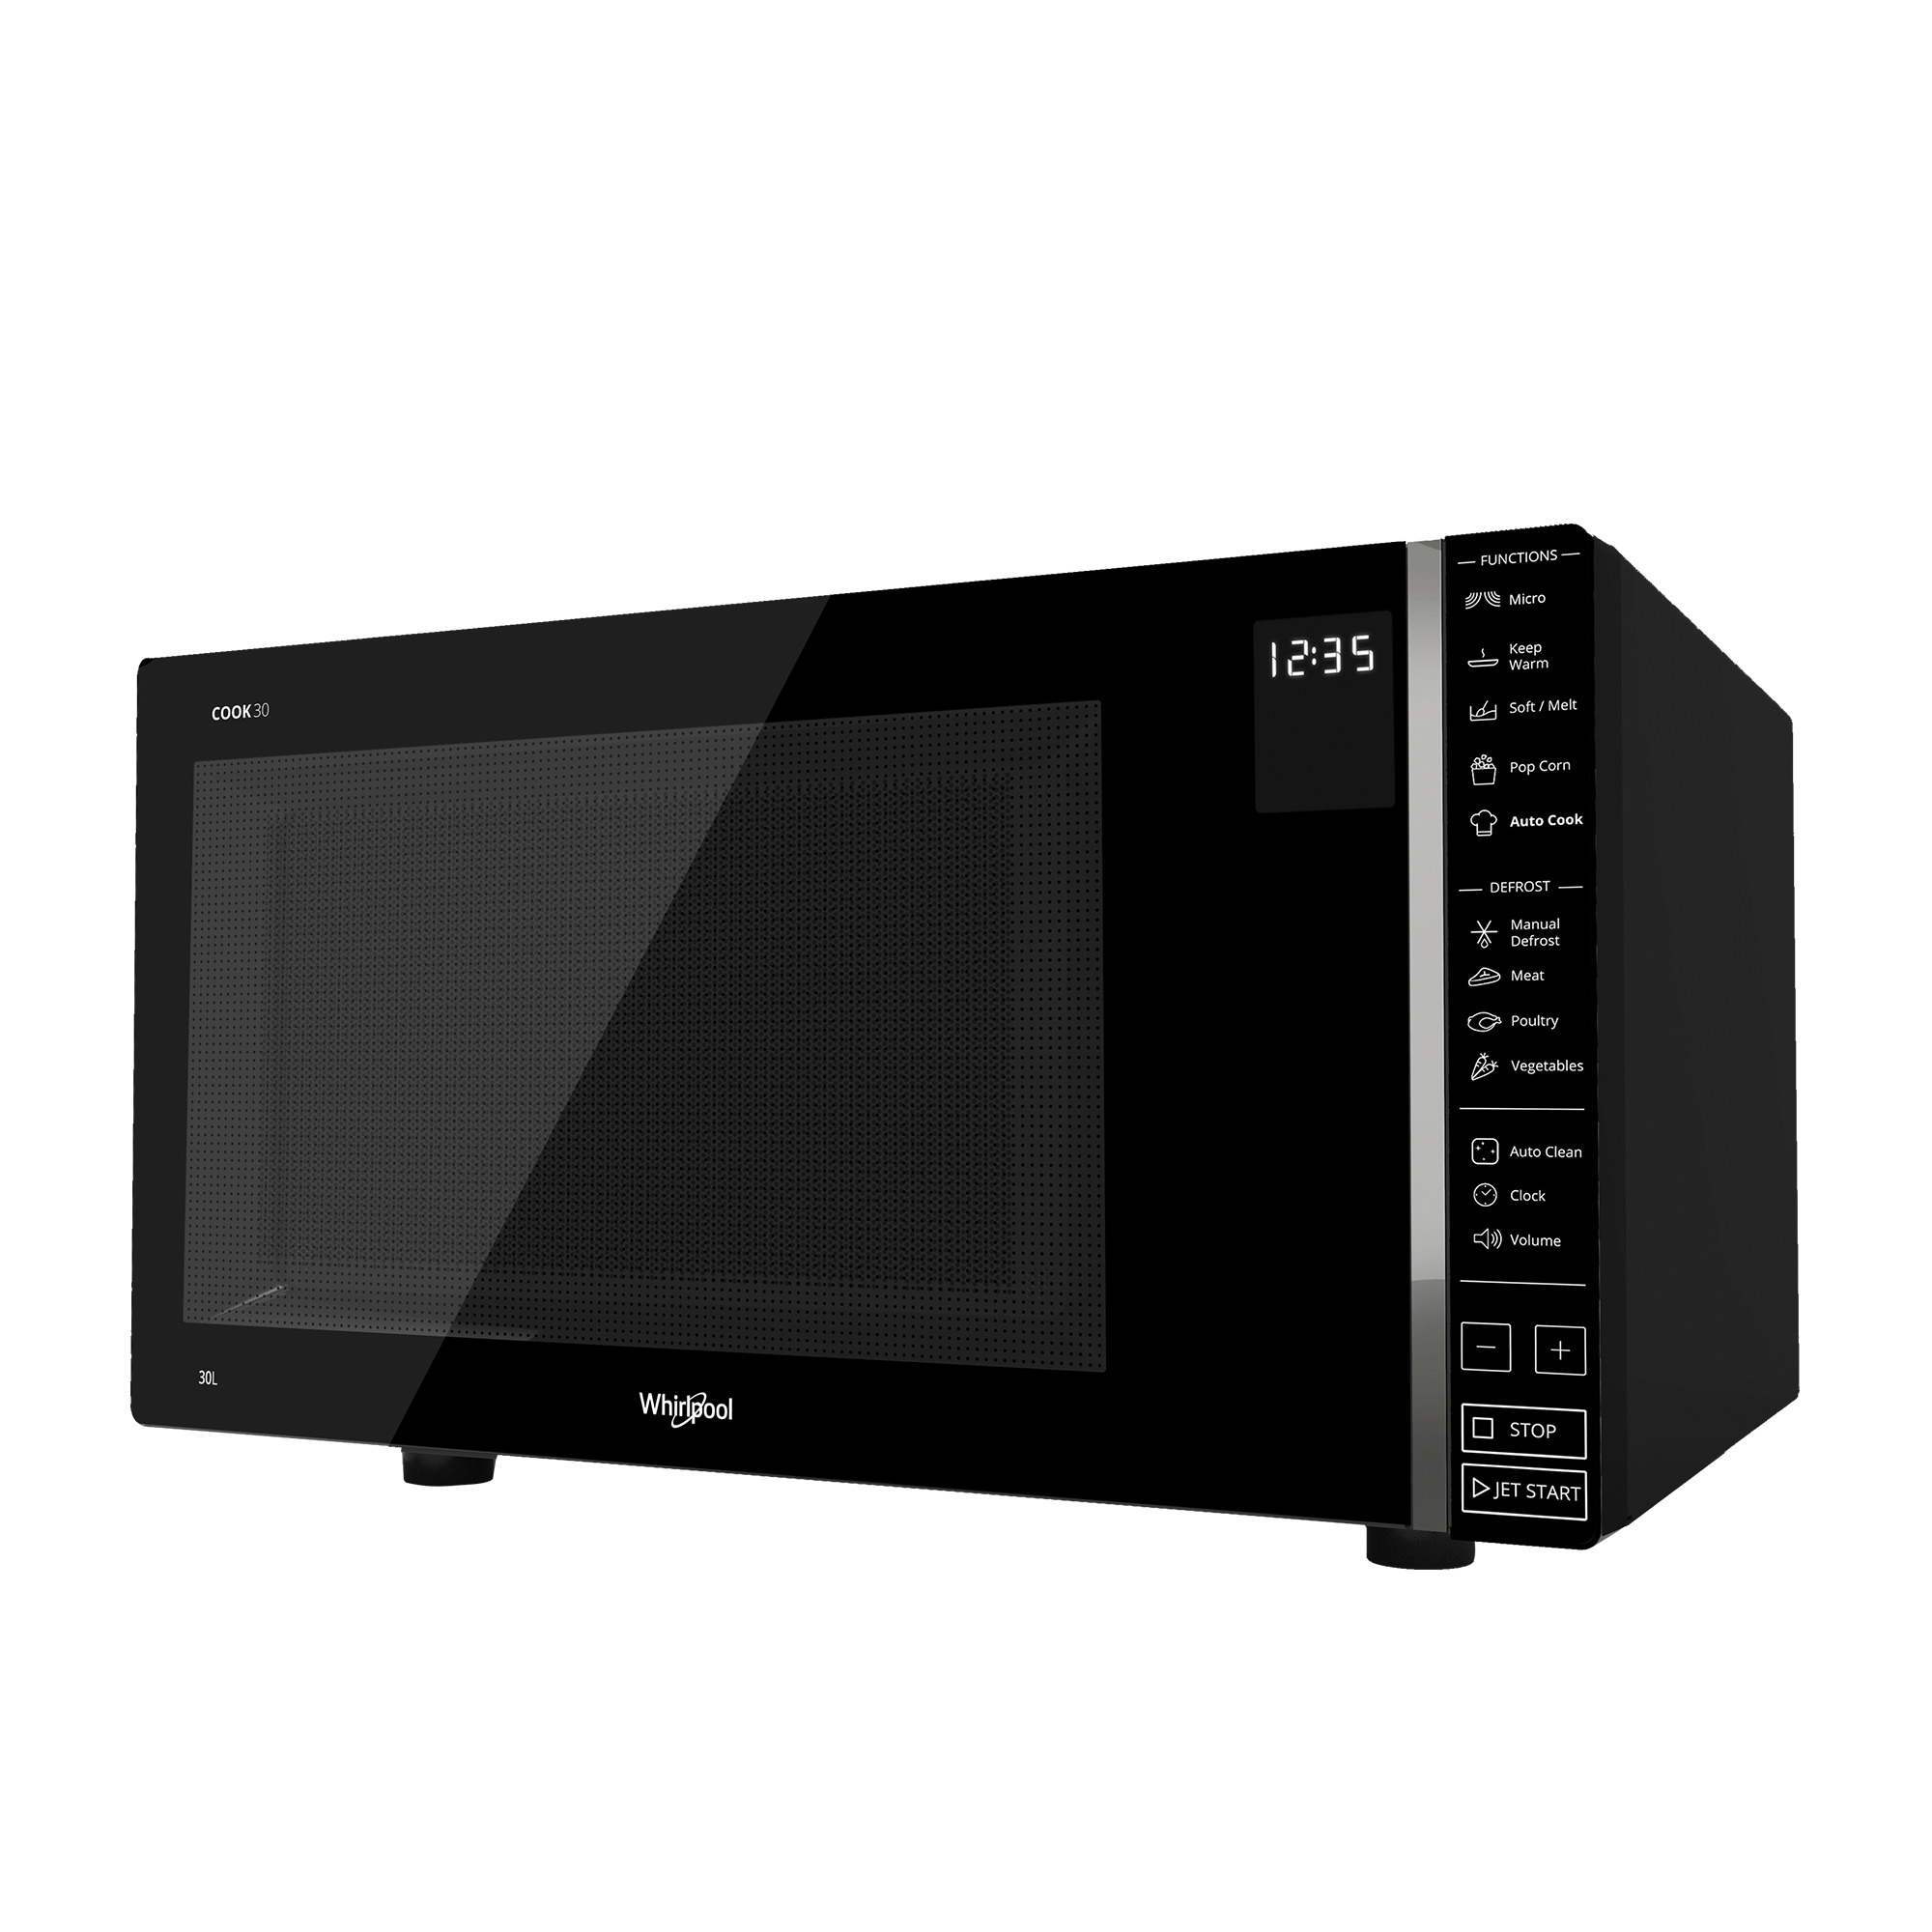 Whirlpool Microwave Oven 30L Black Image 1